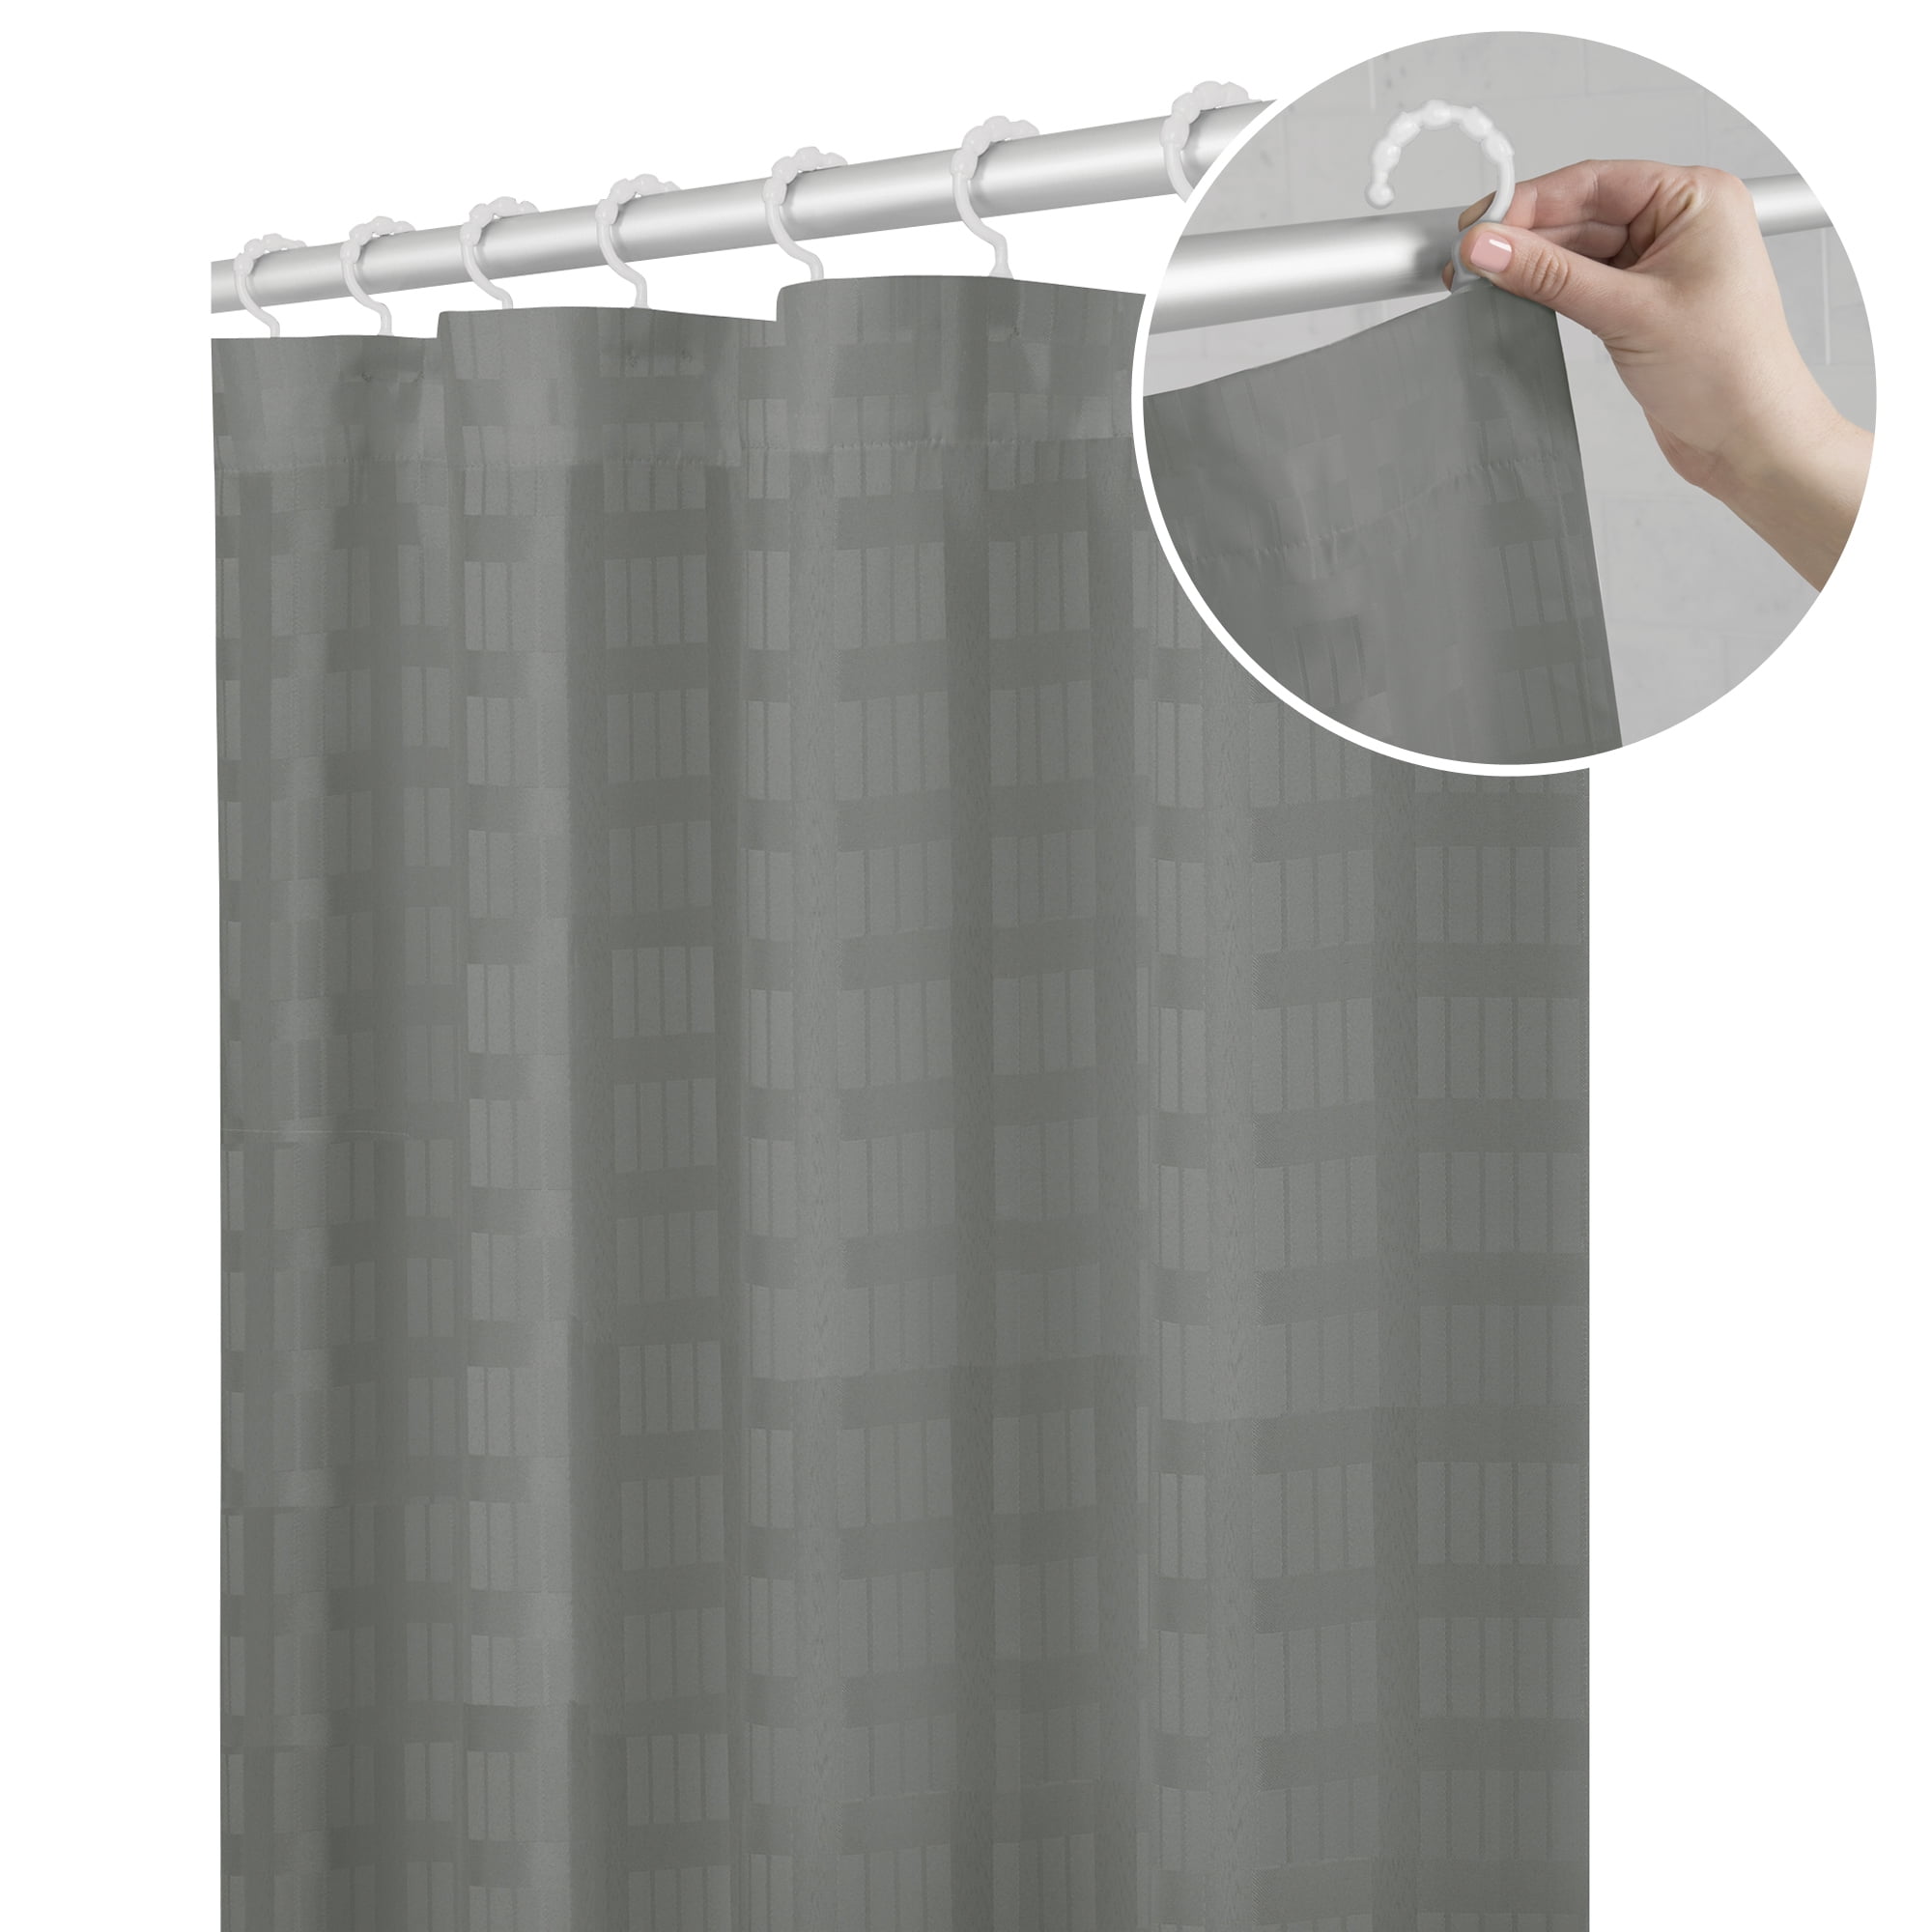 Maytex Smart Curtain Madison Fabric, Maytex Water Repellent Fabric Shower Curtain Liner